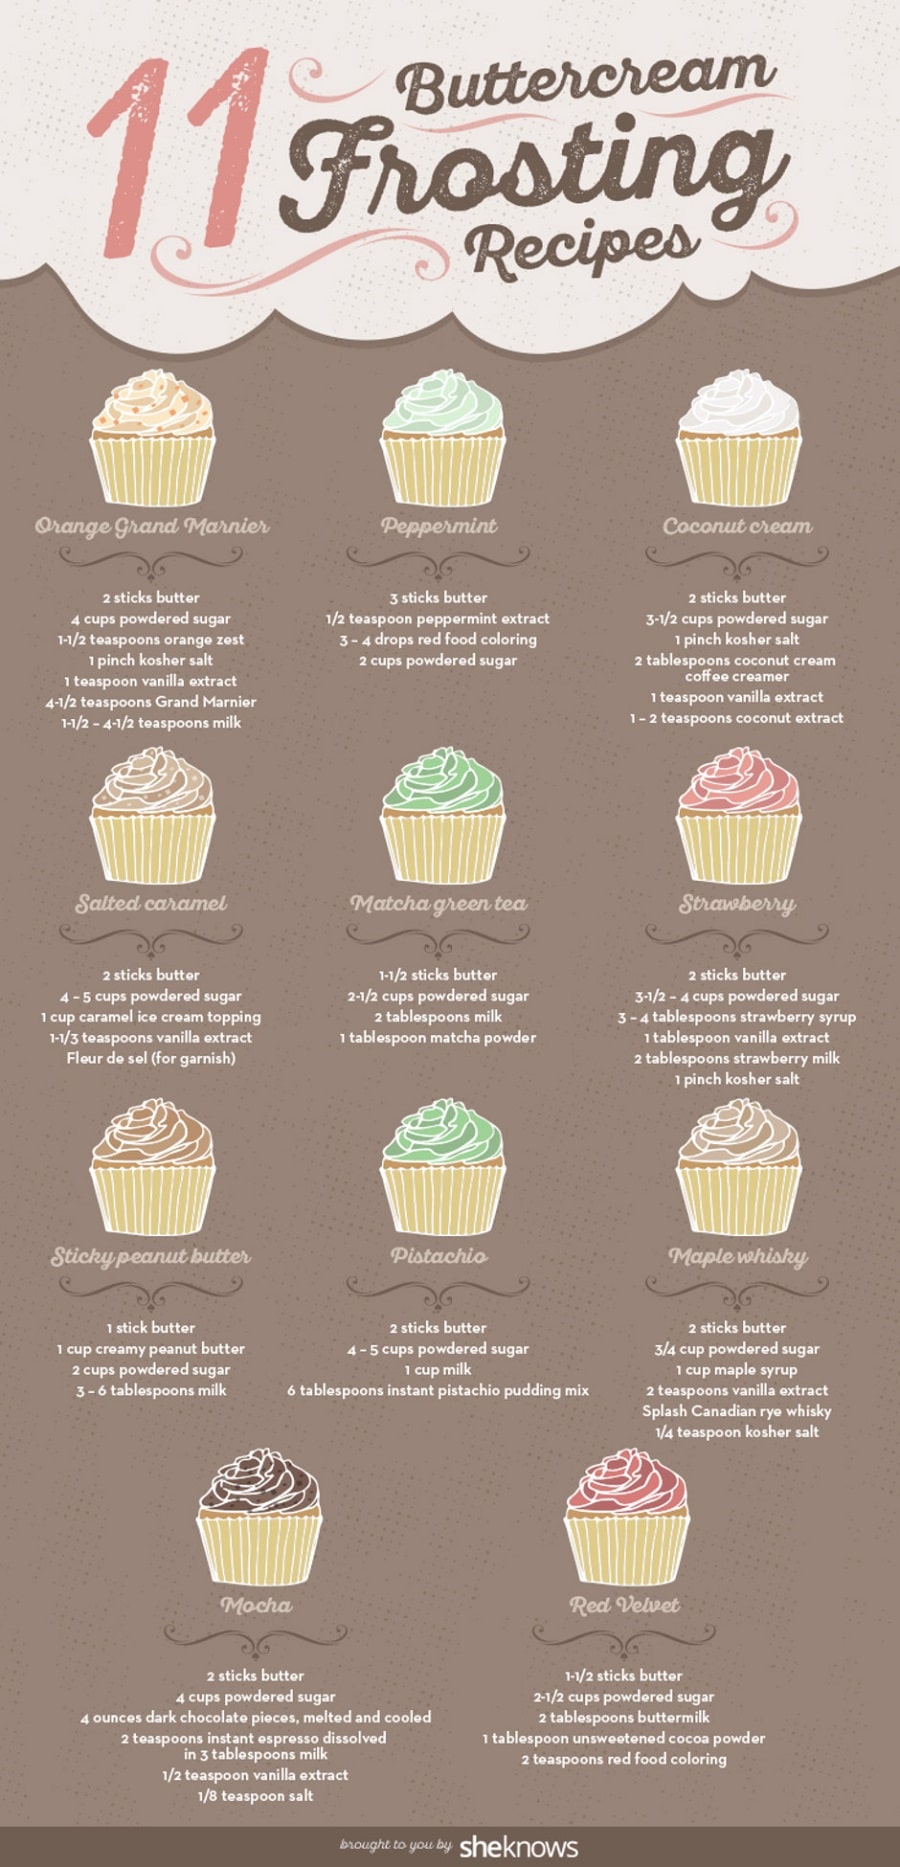 10. Make any kind of buttercream frosting you can imagine.